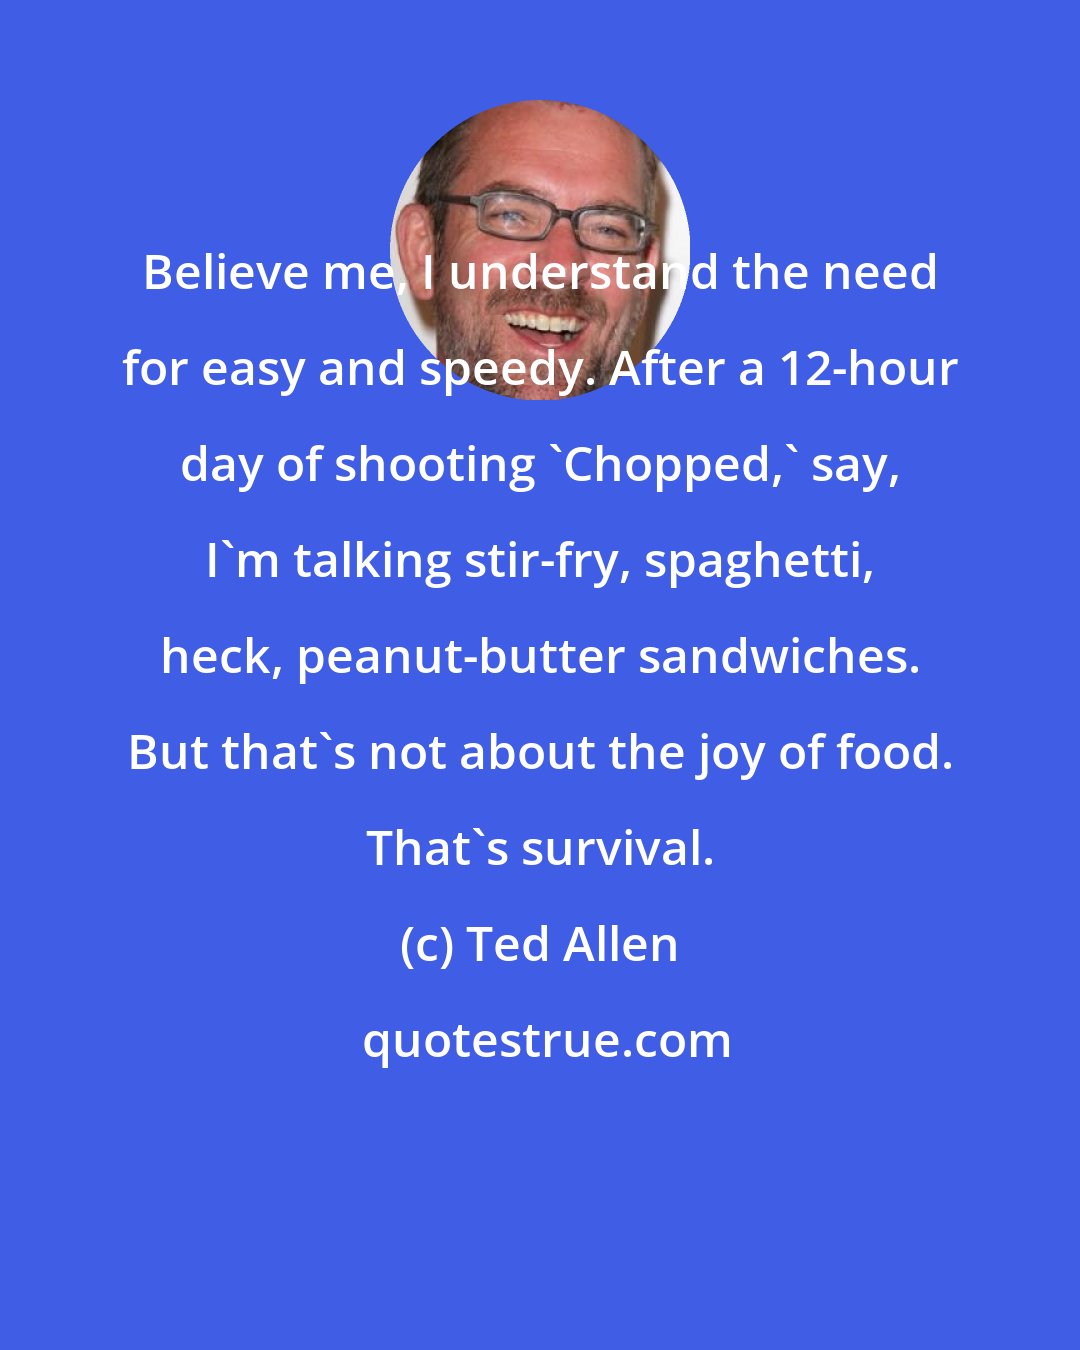 Ted Allen: Believe me, I understand the need for easy and speedy. After a 12-hour day of shooting 'Chopped,' say, I'm talking stir-fry, spaghetti, heck, peanut-butter sandwiches. But that's not about the joy of food. That's survival.